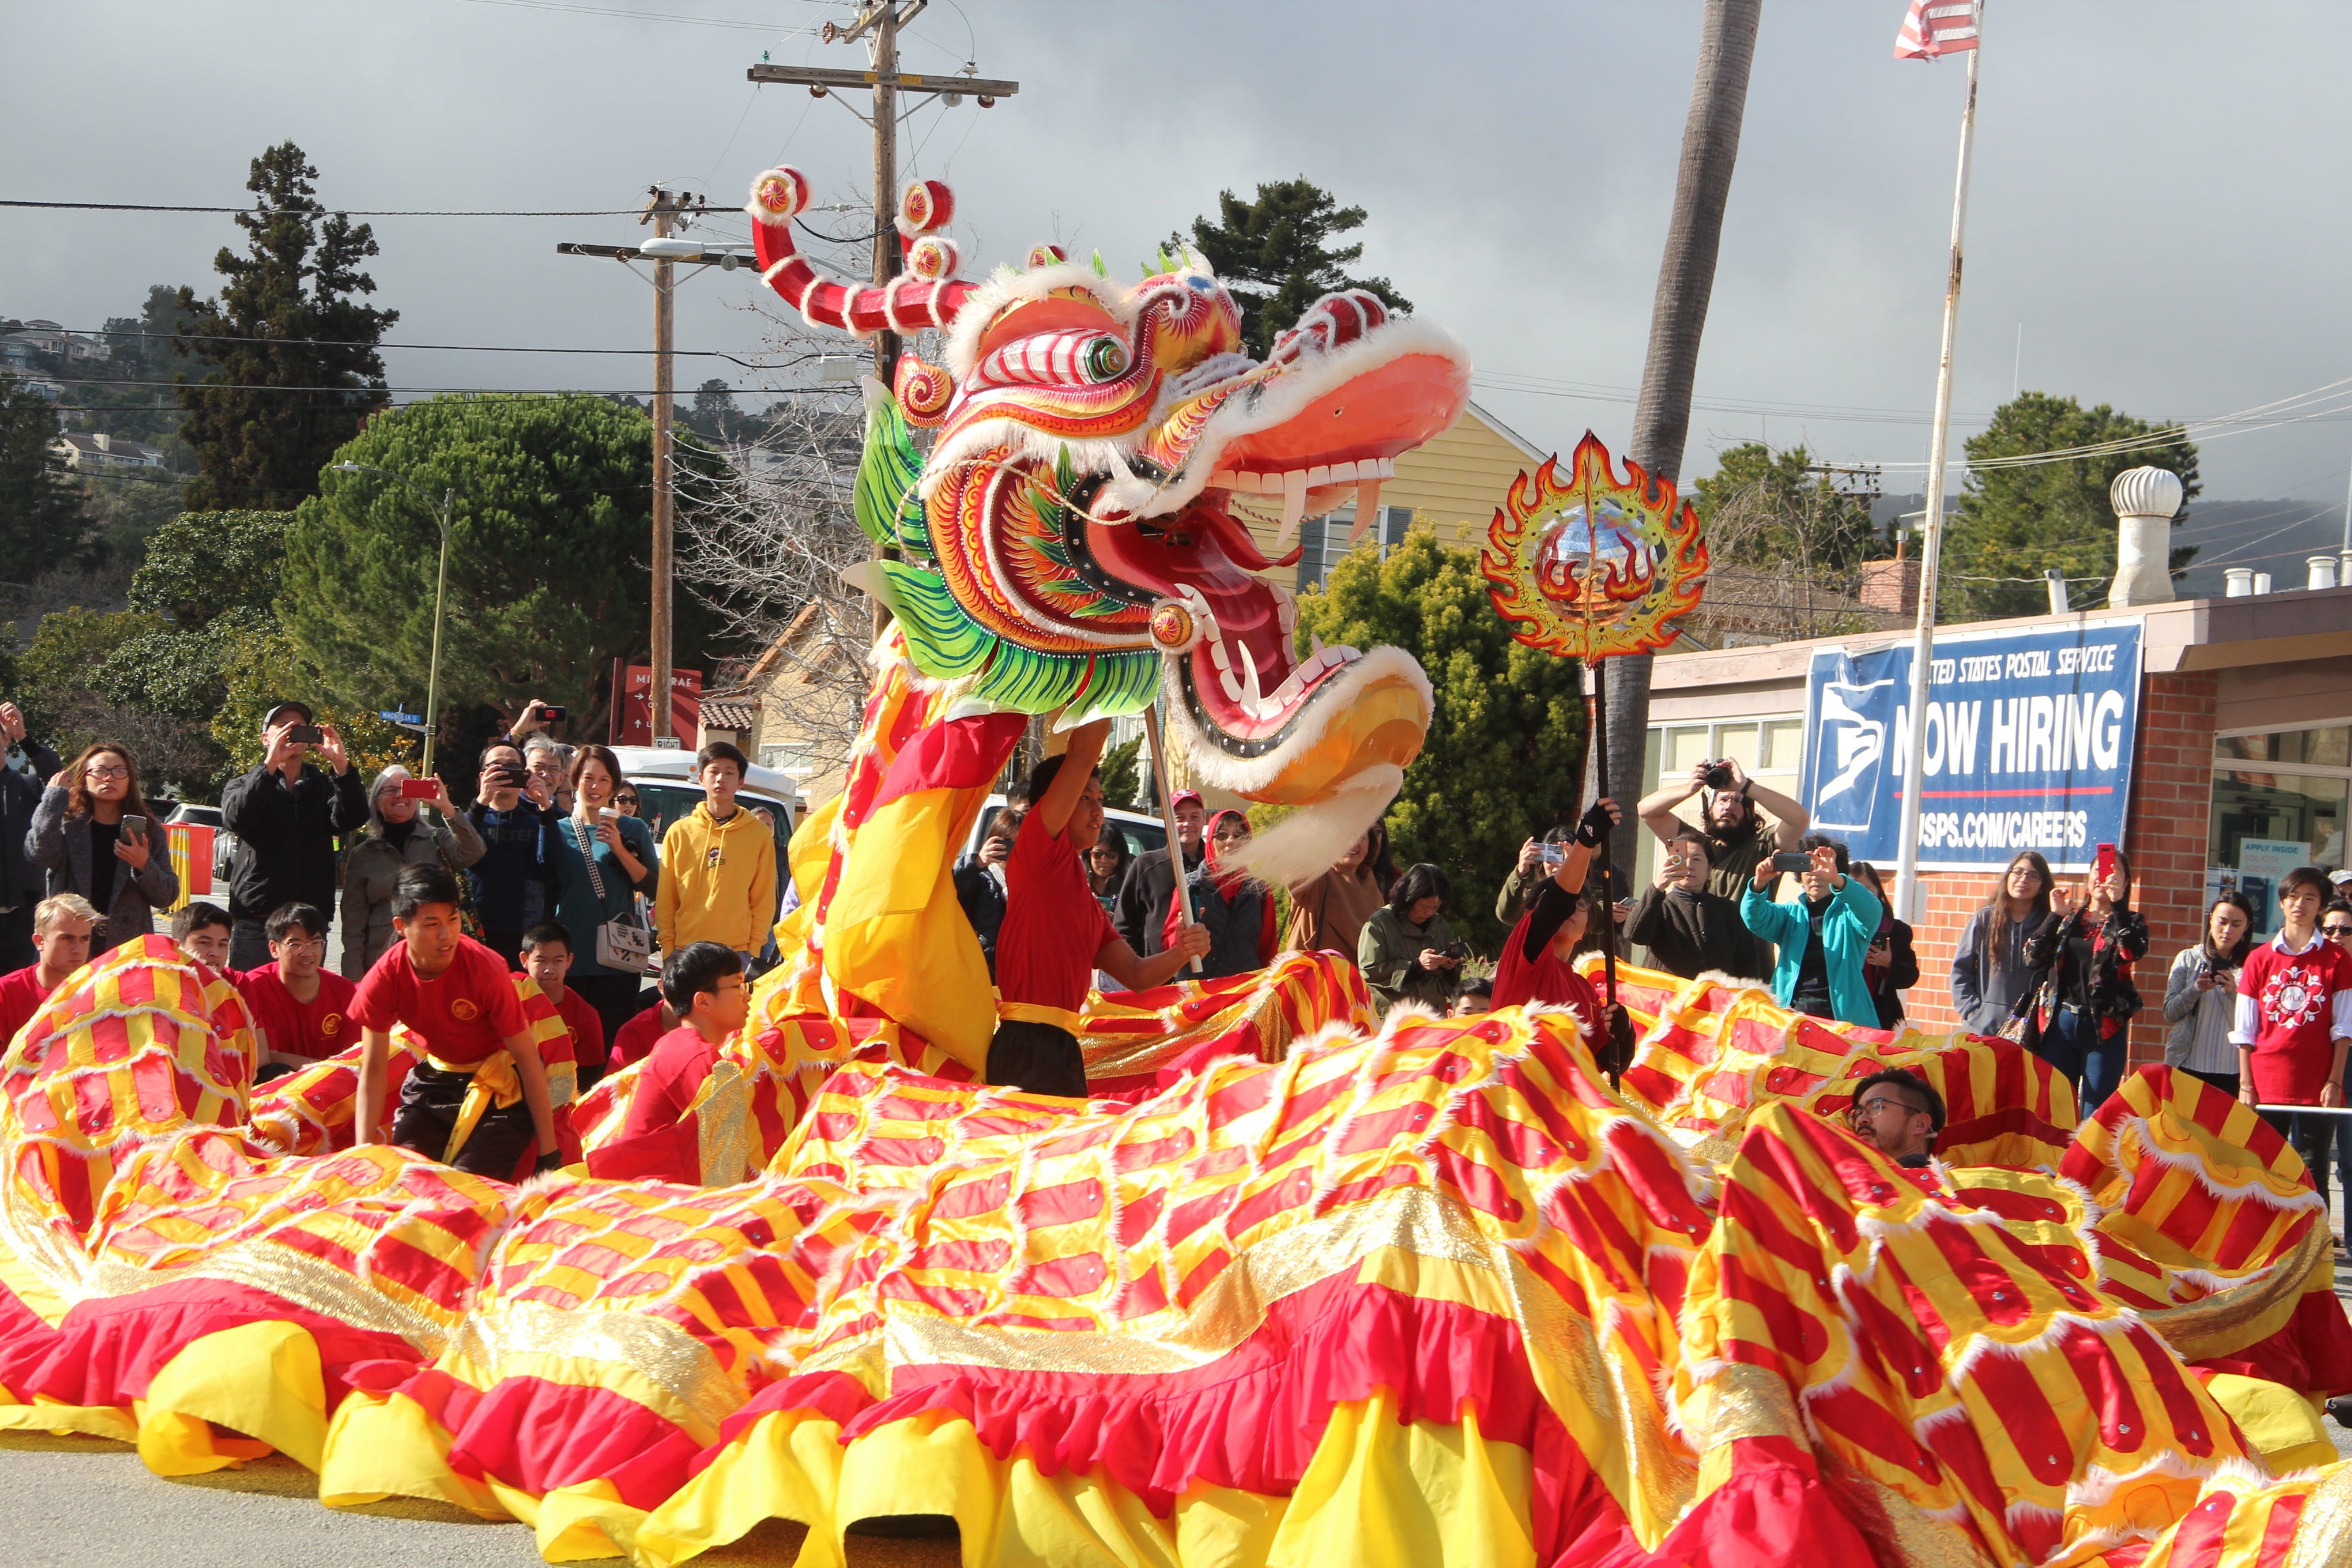 Thousands turned out celebrating Lunar New Year in Millbrae with Golden